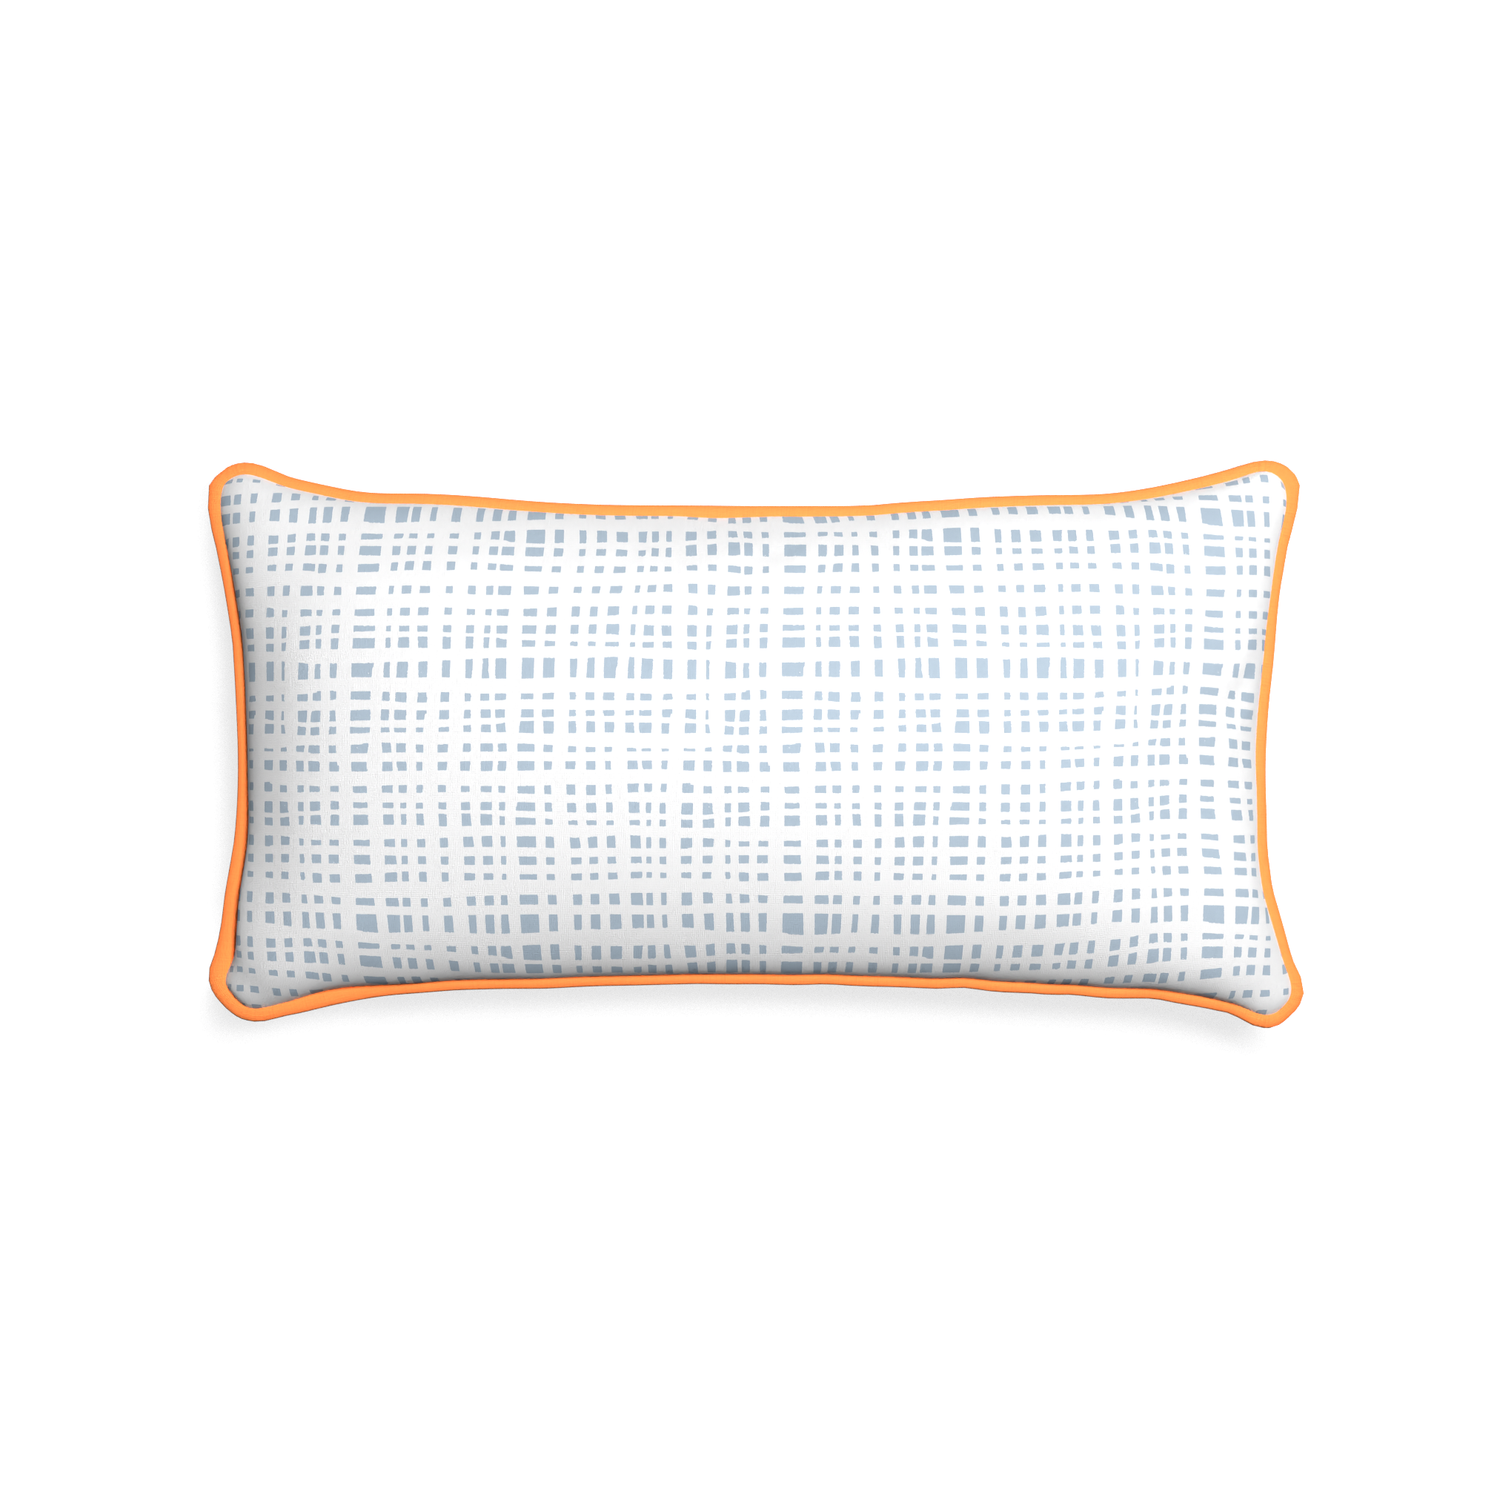 Midi-lumbar ginger sky custom plaid sky bluepillow with clementine piping on white background